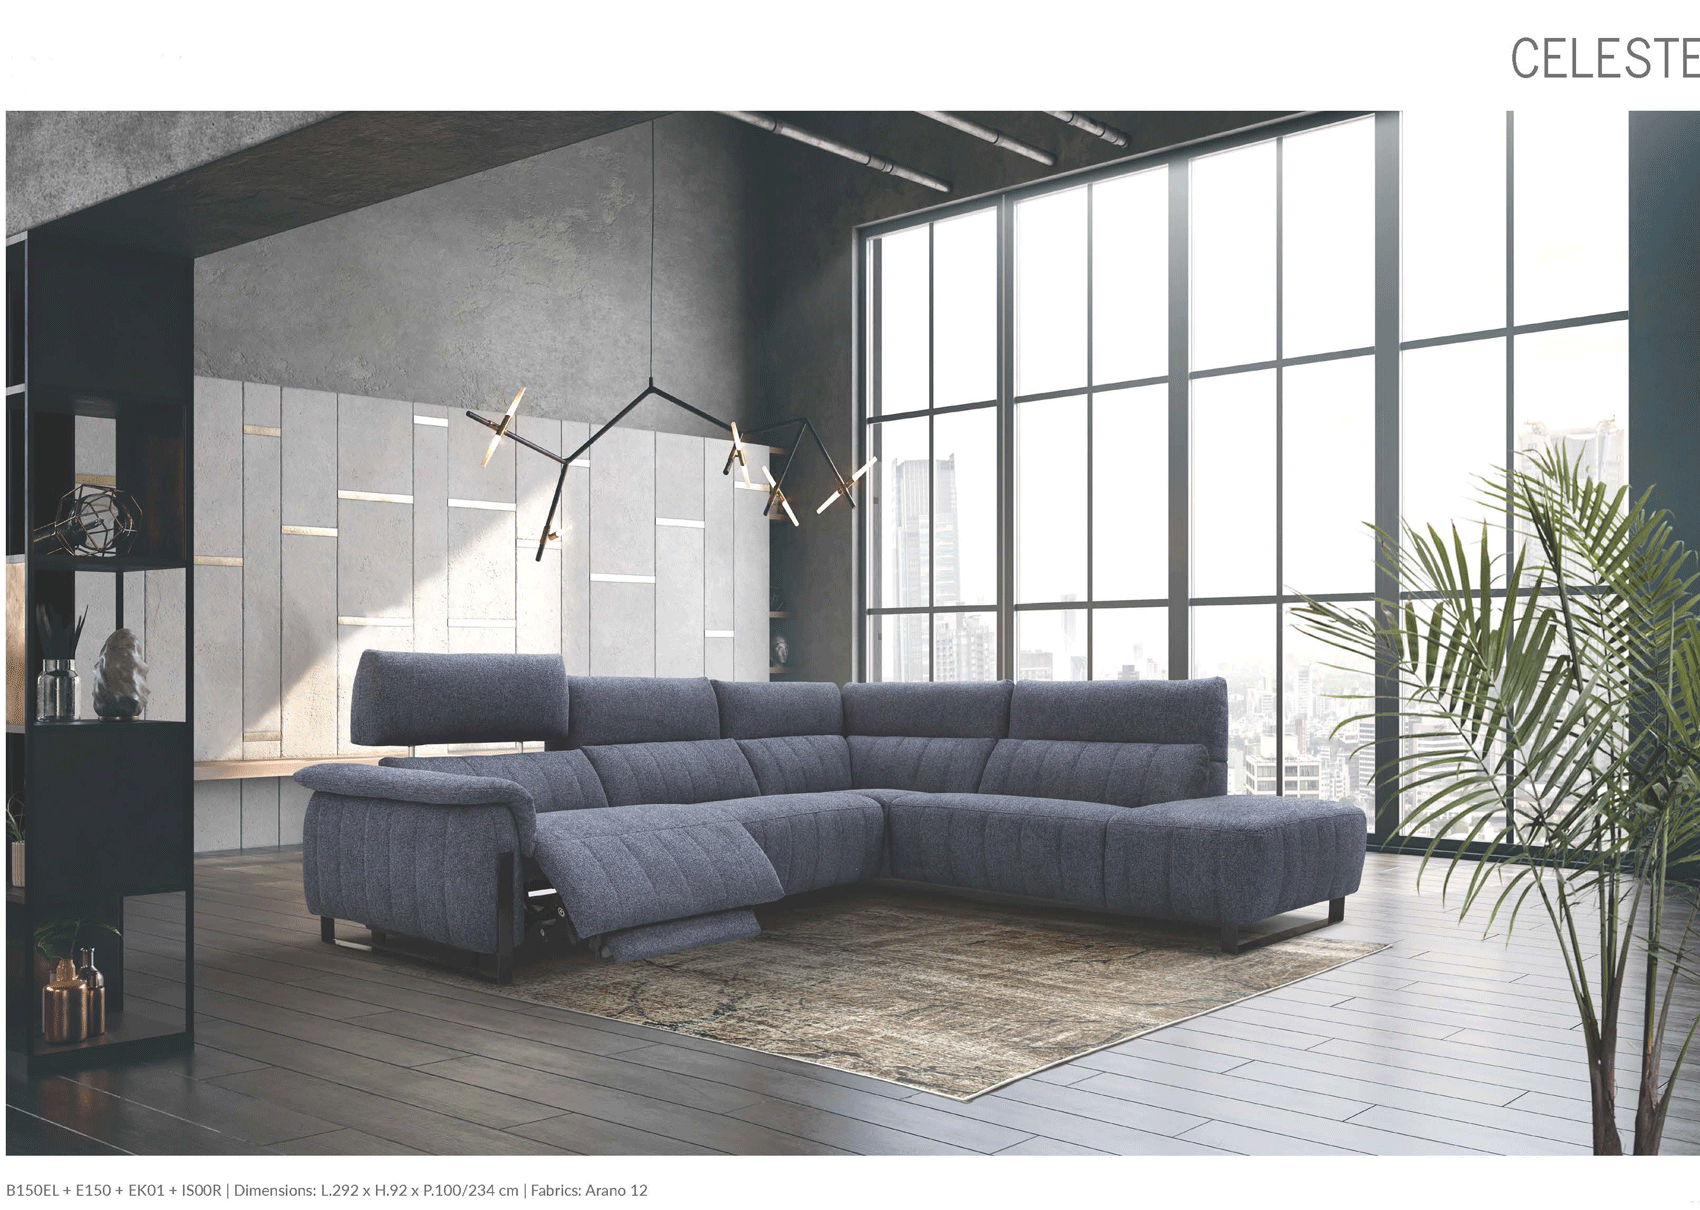 Brands Arredoclassic Living Room, Italy Celeste Sectional